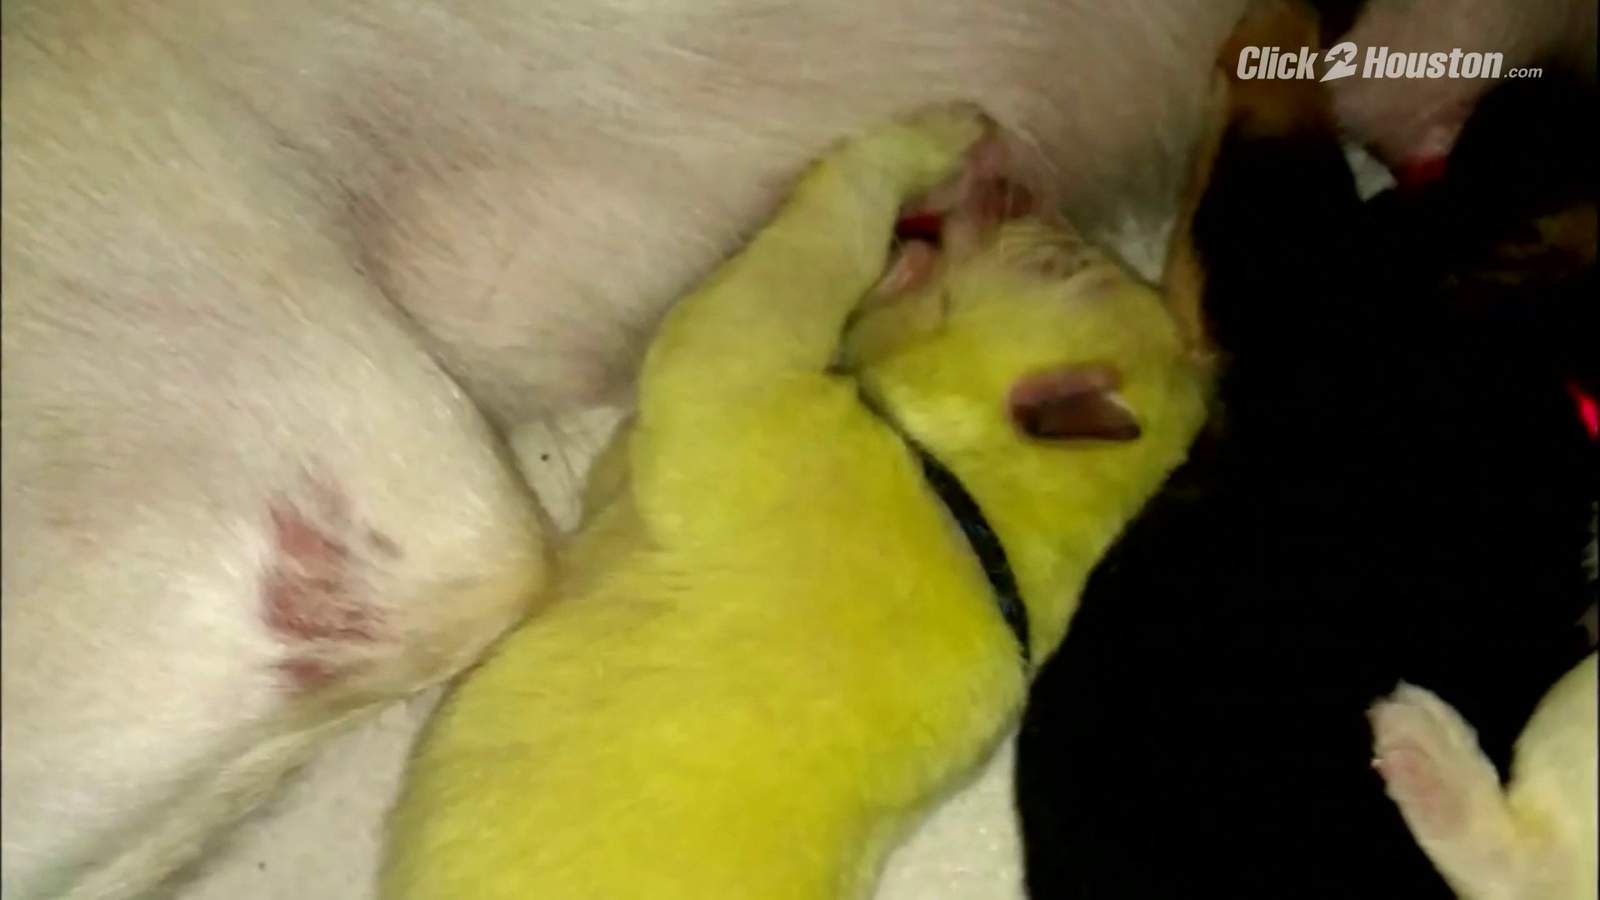 DOG GIVES BIRTH TO LIME GREEN PUPPY (WHAT? CUTE!)